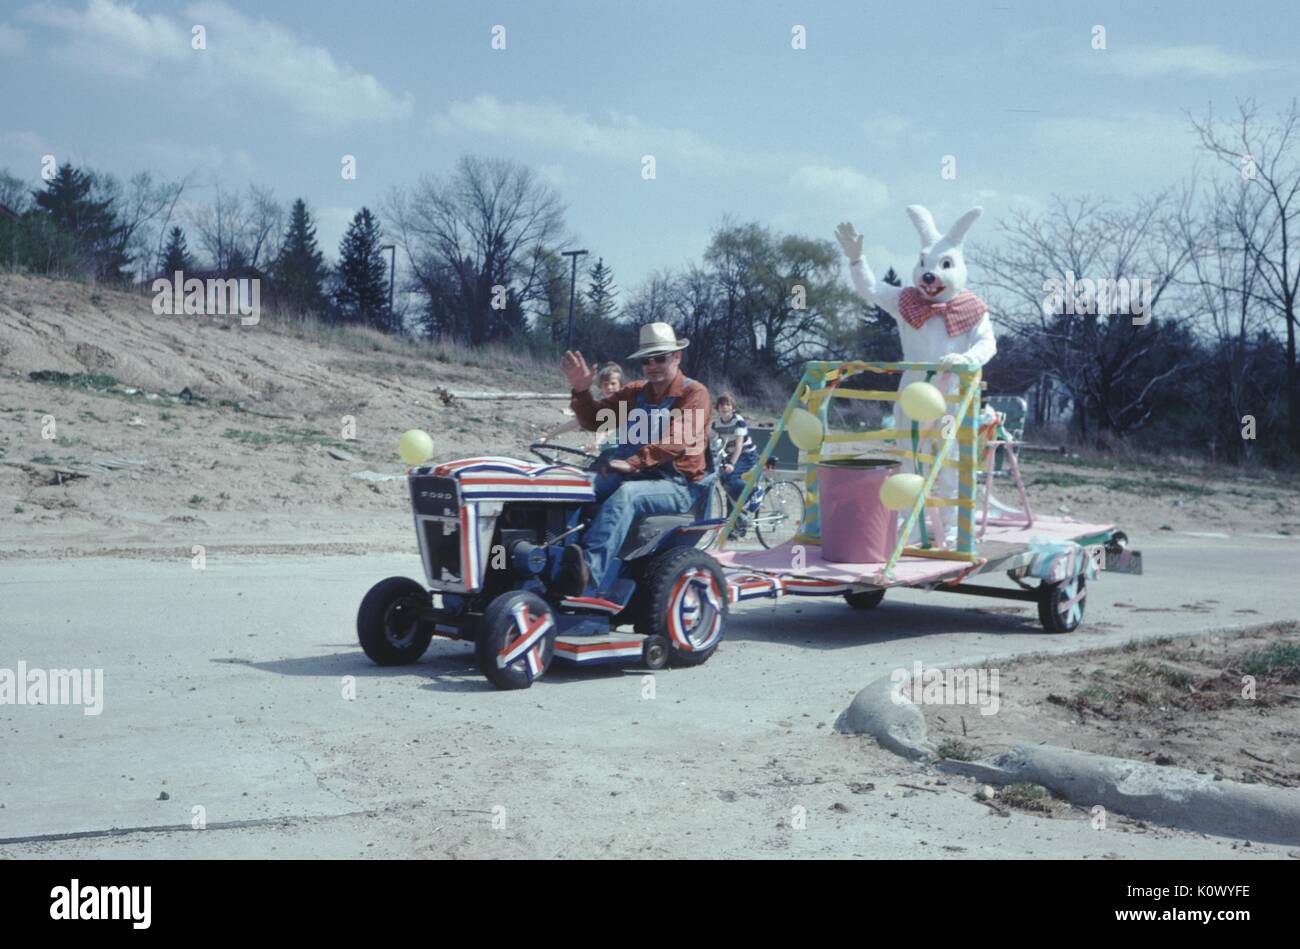 Parade float, a man in a cowboy hat sitting on a riding lawnmower and waving, wearing a cowboy hat, pulling a parade float on which another man stands, wearing a white rabbit costume and waving, during a July 4th parade, paper bunting on the tractor, 1971. Photo credit Smith Collection/Gado/Getty Images. Stock Photo